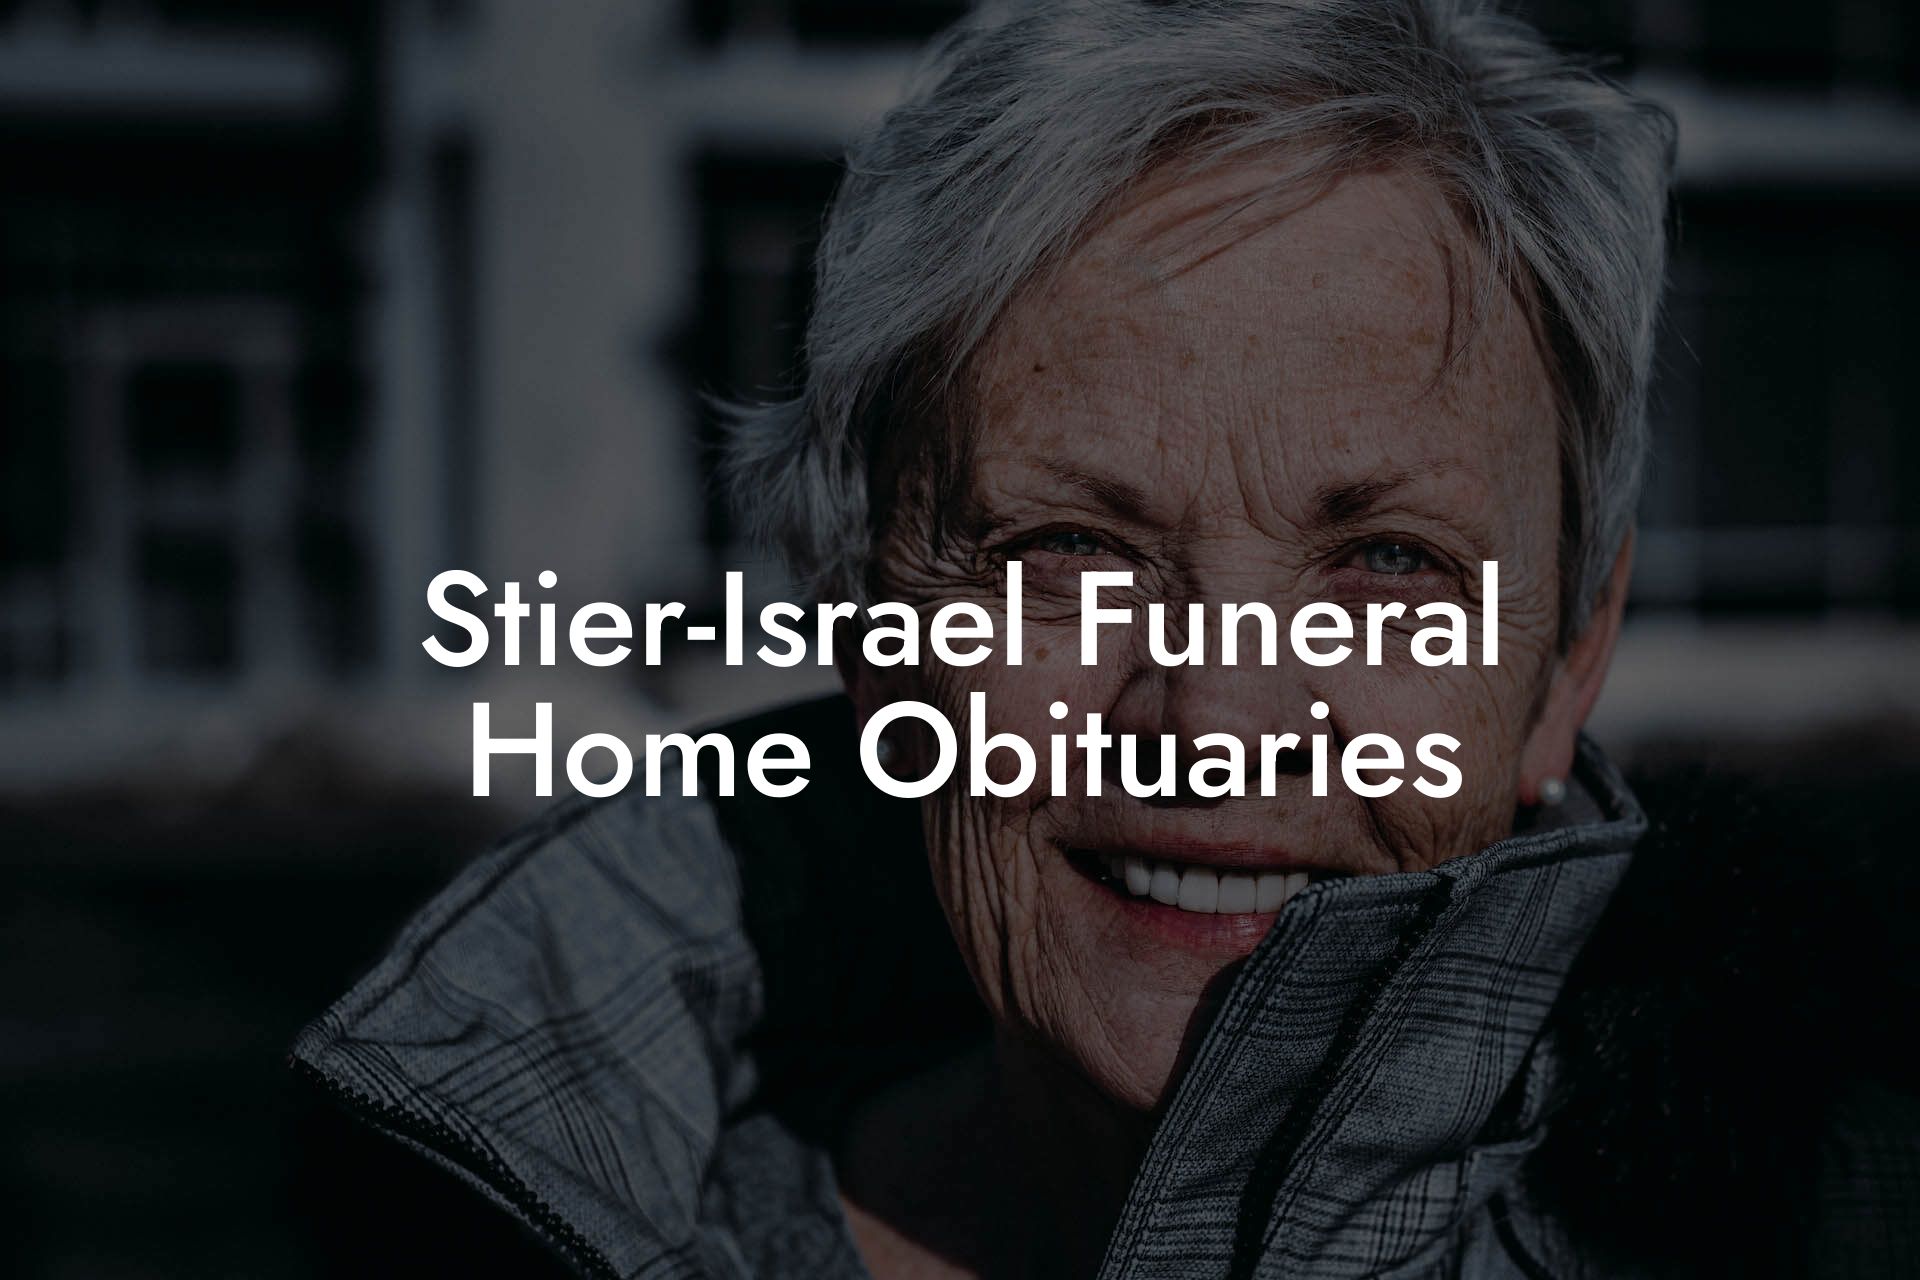 Stier-Israel Funeral Home Obituaries